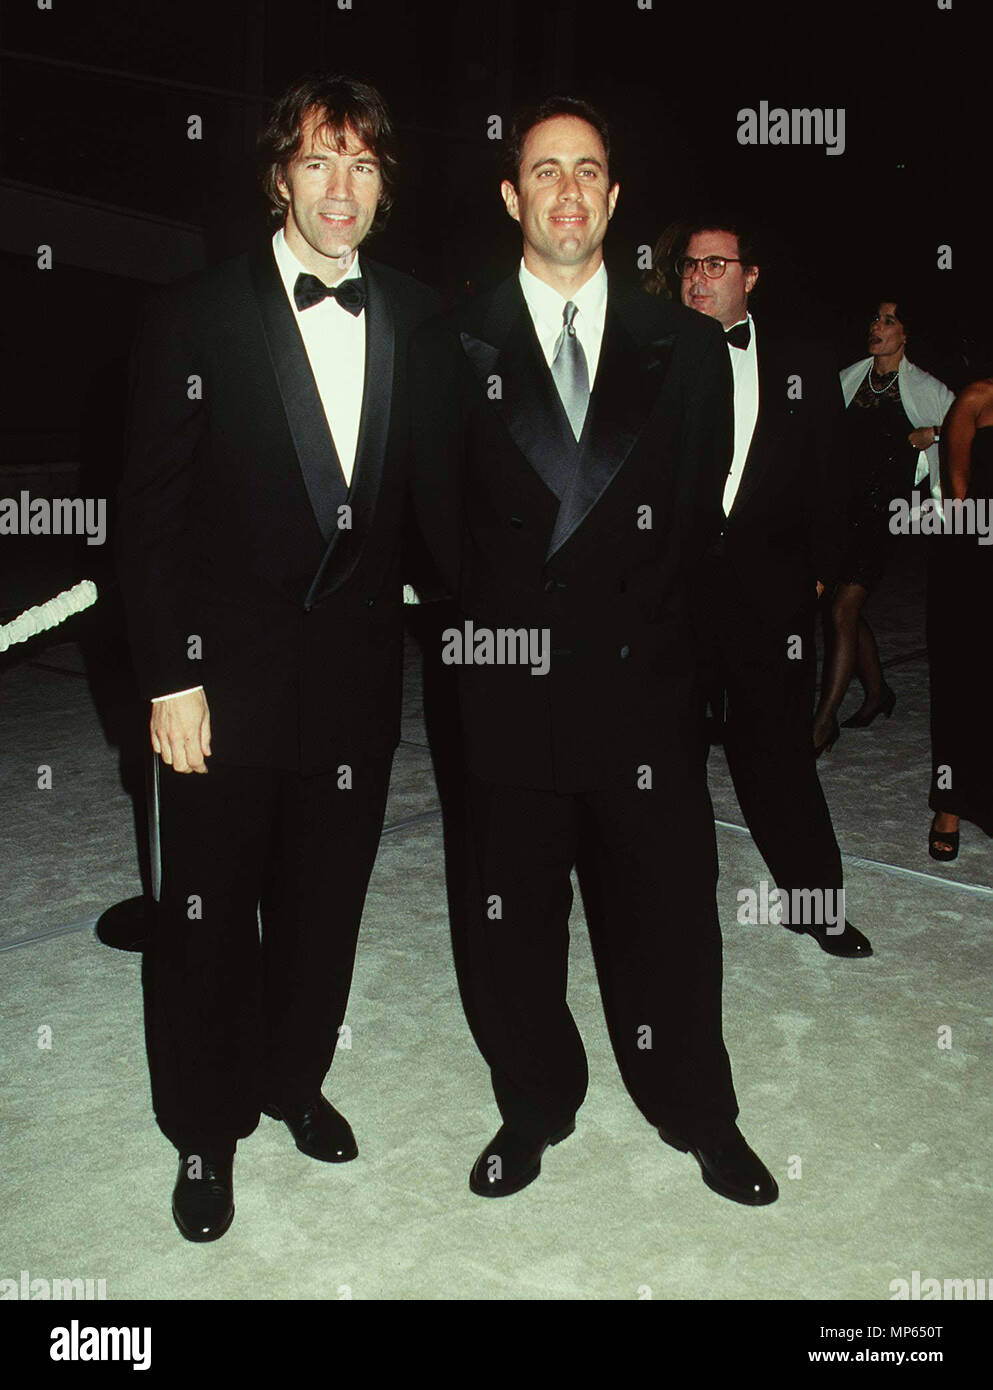 Kelley D. & Seinfeld Jerry  - Kelley D. & Seinfeld Jerry  Event in Hollywood Life - California, Red Carpet Event, USA, Film Industry, Celebrities, Photography, Bestof, Arts Culture and Entertainment, Topix Celebrities fashion, Best of, Hollywood Life, Event in Hollywood Life - California, Red Carpet and backstage, movie celebrities, TV celebrities, Music celebrities, Topix, Bestof, Arts Culture and Entertainment, vertical, one person, Photography,   Three Quarters, 1993 to 1999, inquiry tsuni@Gamma-USA.com , Credit Tsuni / USA,   === Red Carpet Event, USA, Film Industry, Celebrities, Photograp Stock Photo